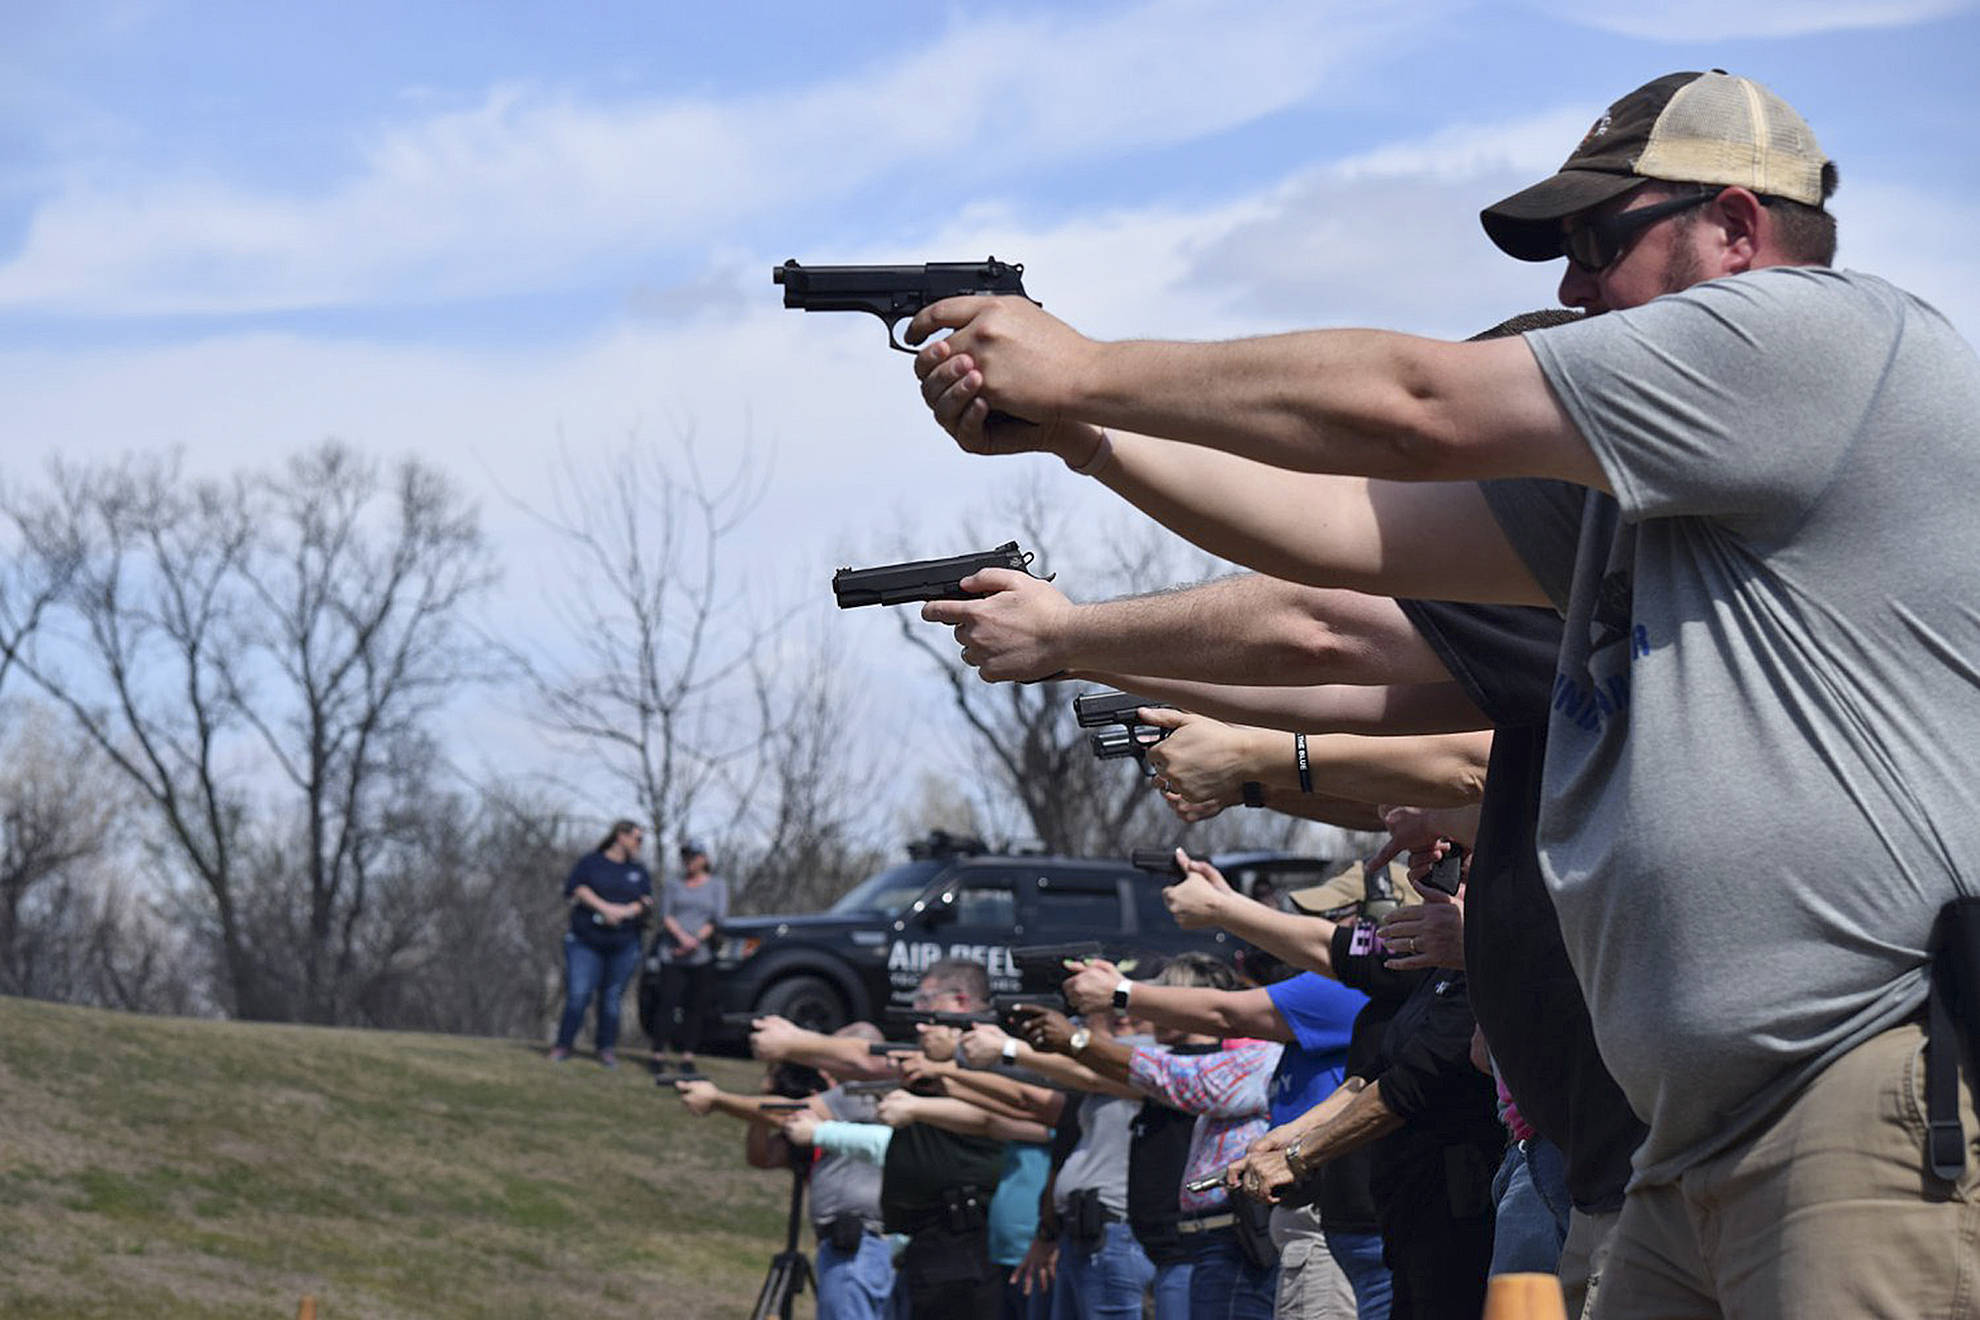 These Texas teachers added Pistol 101 to their training